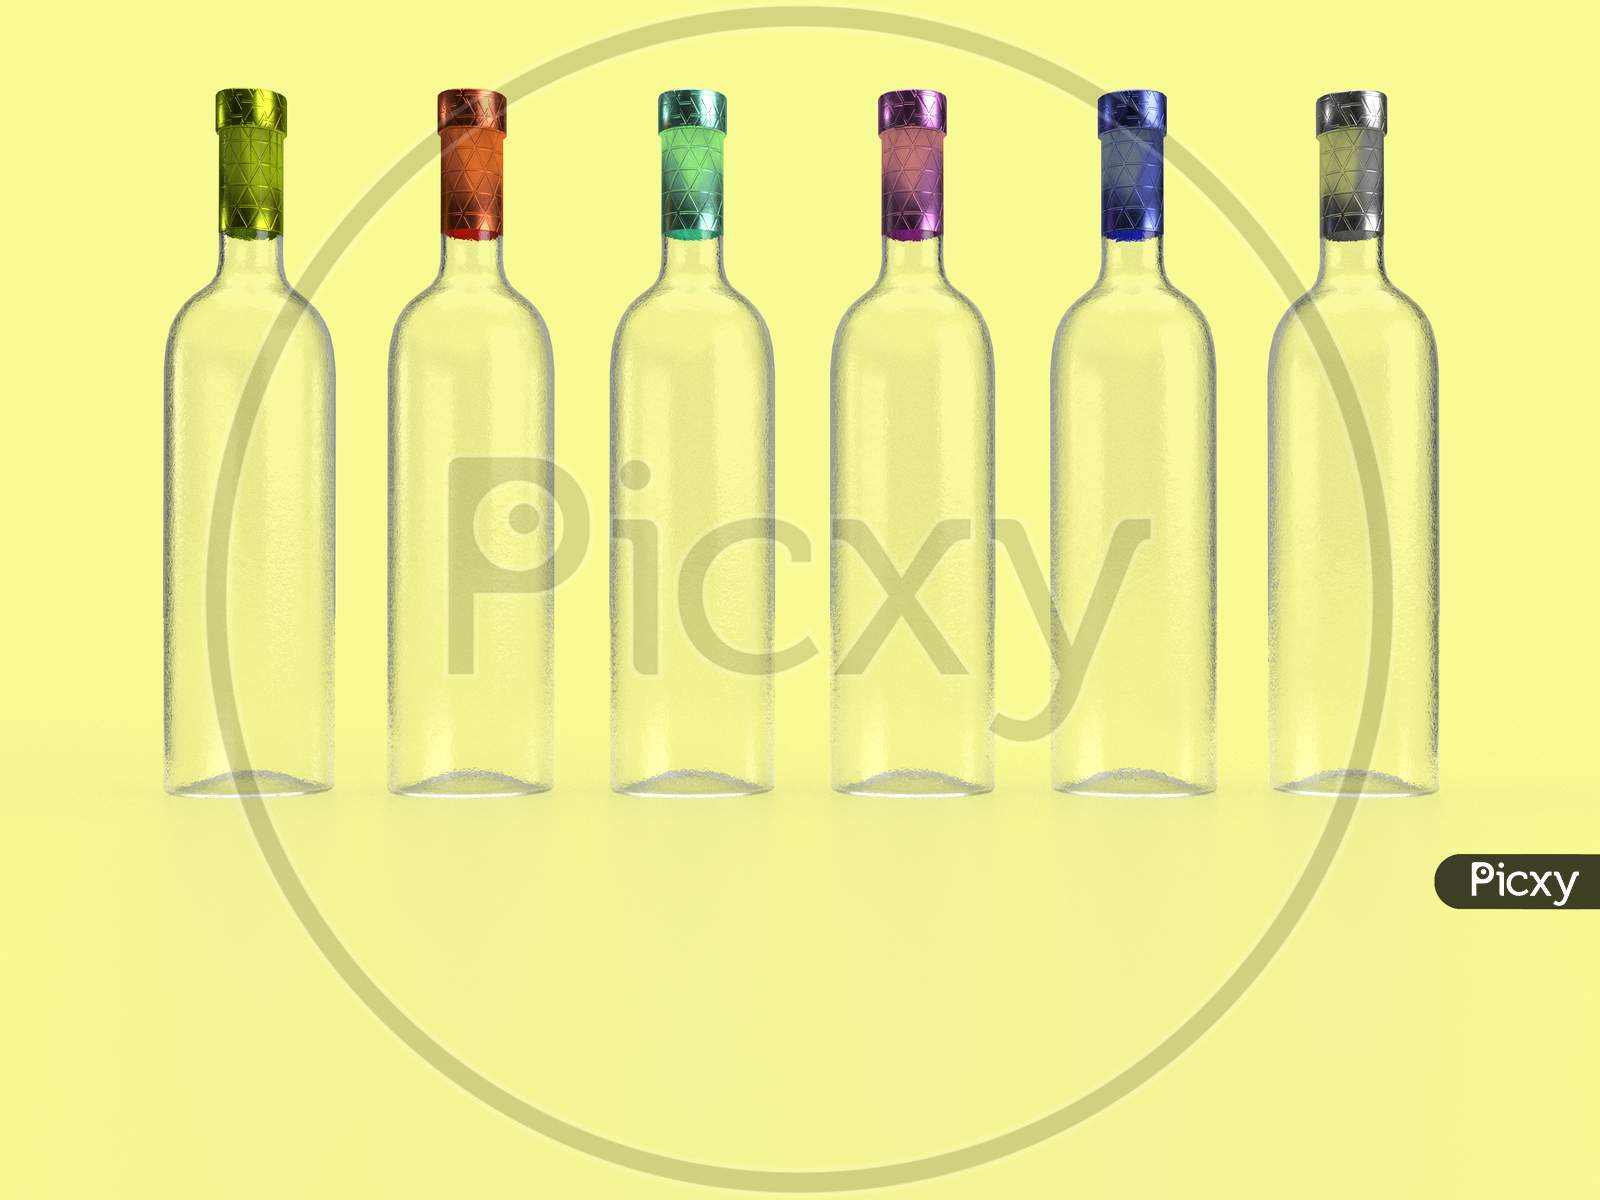 Download Image Of 3d Render Of Different Colored Foil Sealed Frosted Glass Wine Bottle In Solid Pastel Yellow Background With No Label For Product Mockup Sf556023 Picxy